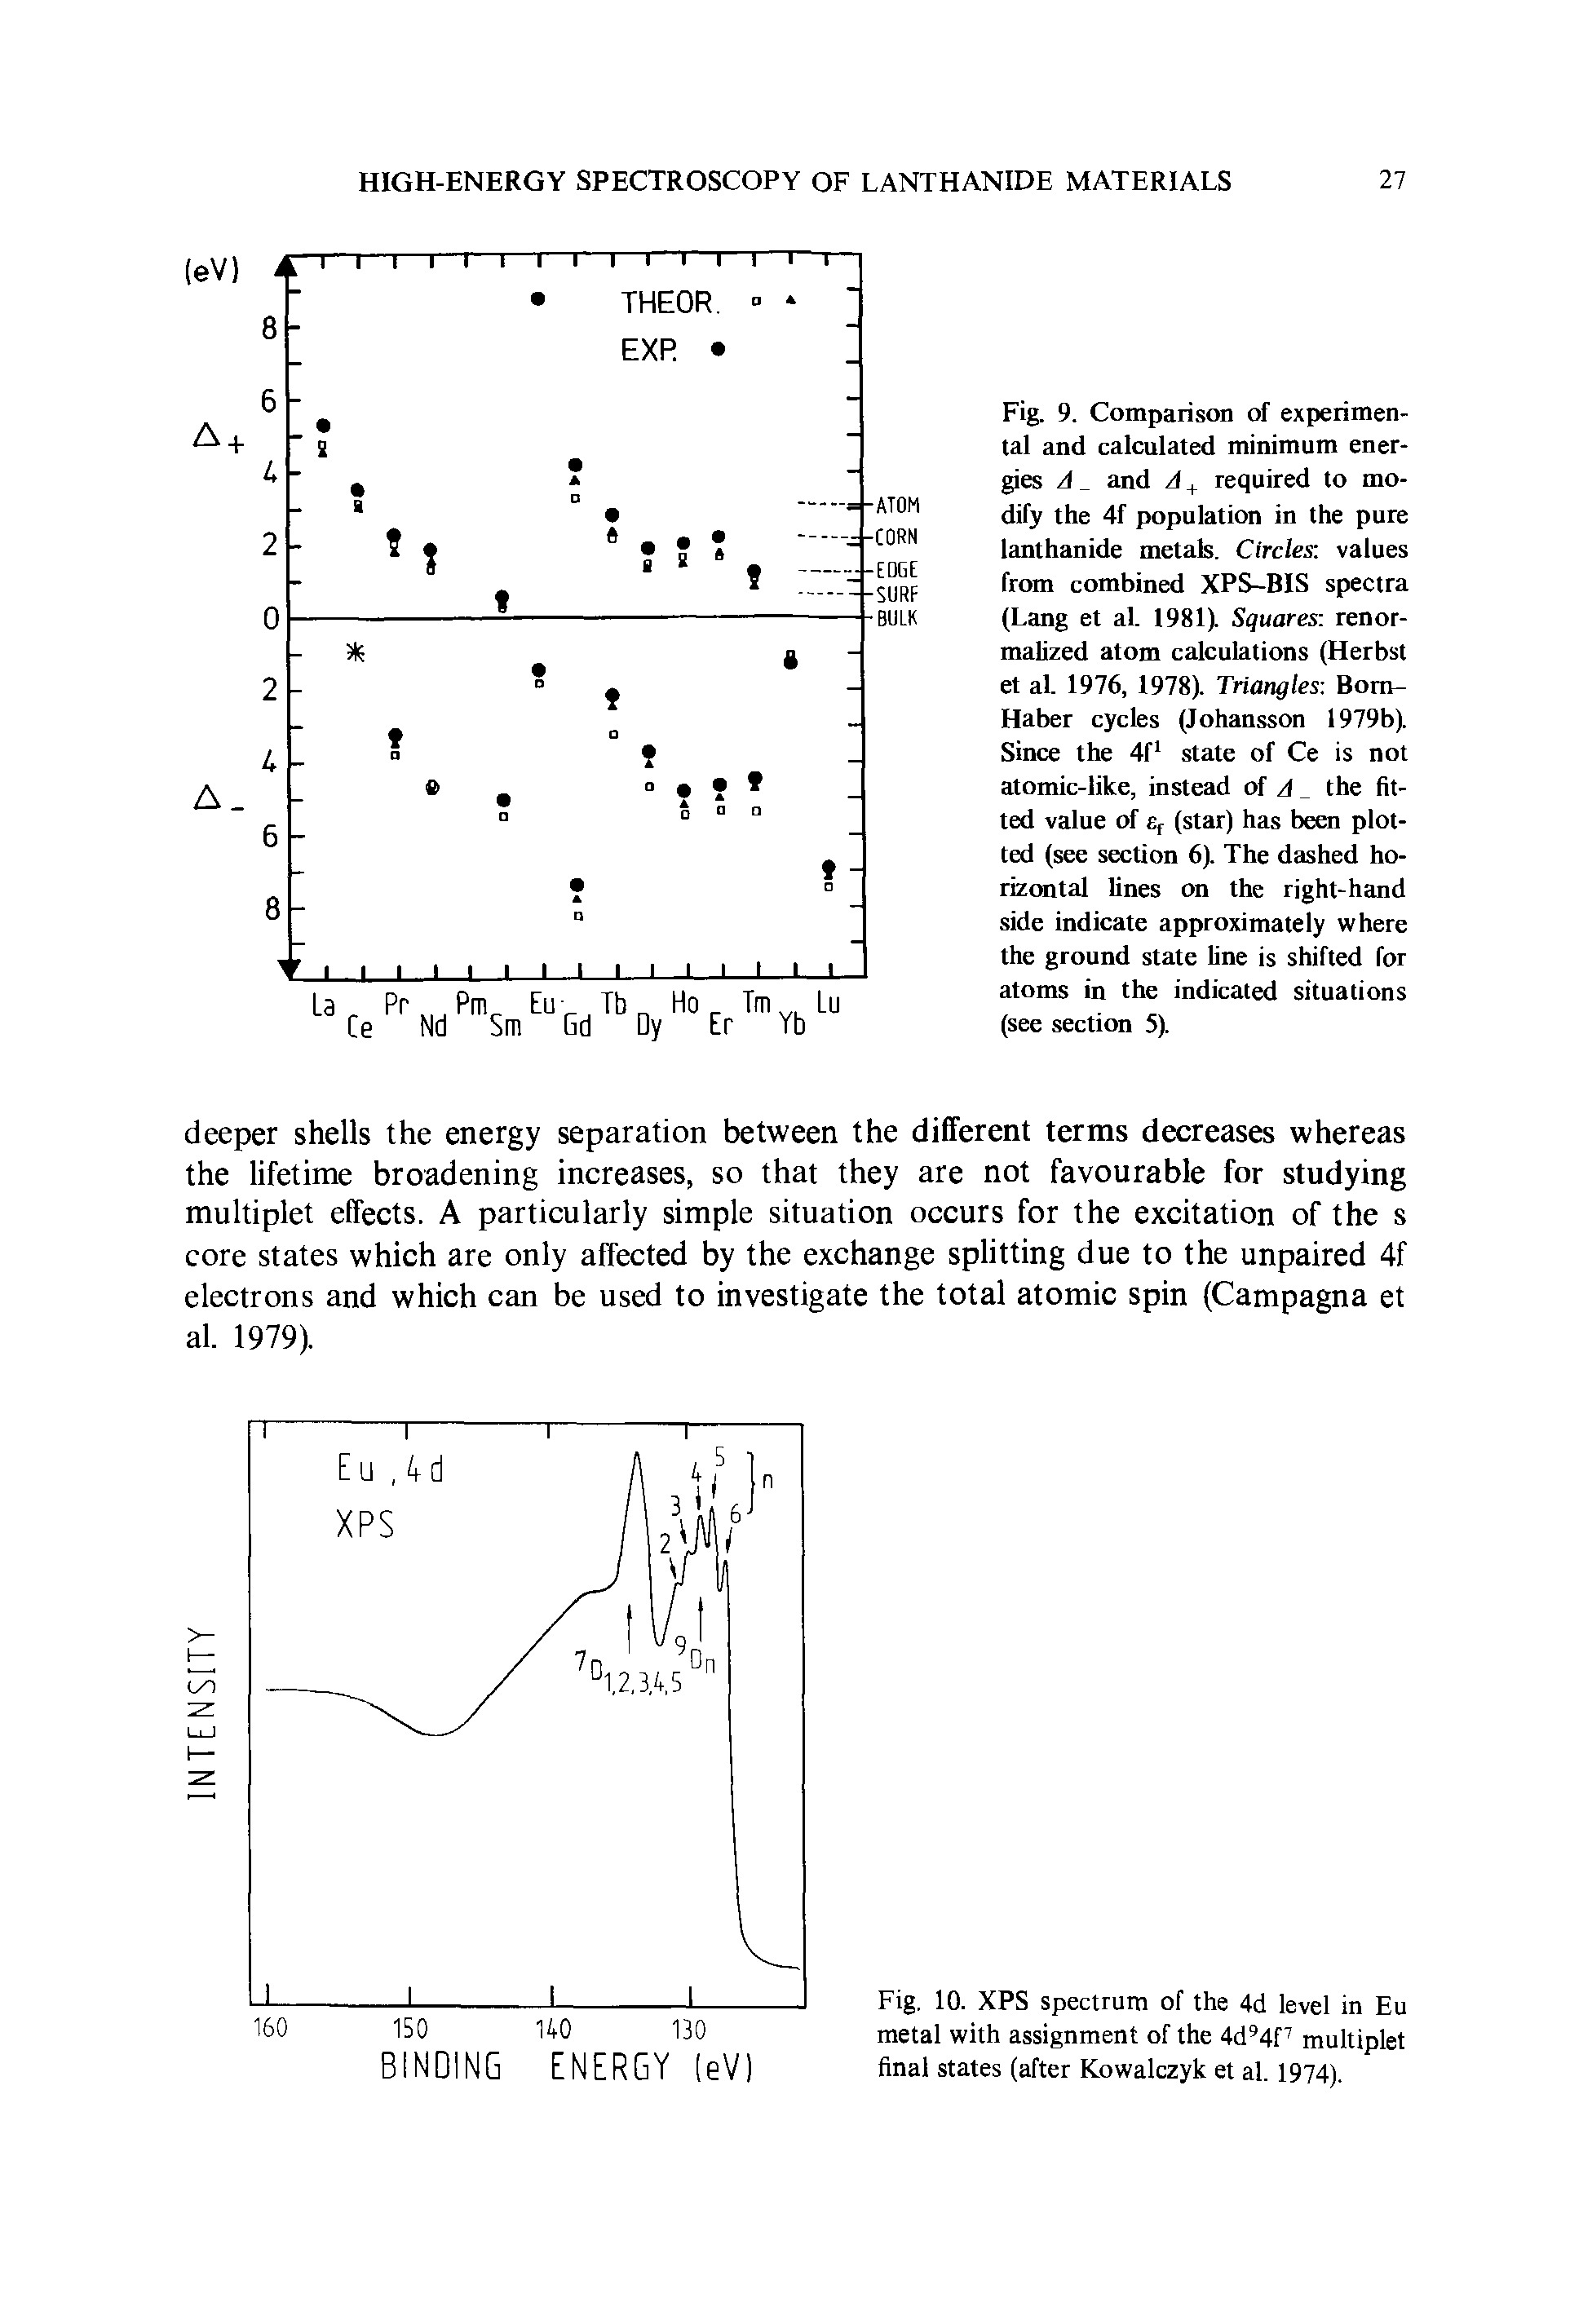 Fig. 9. Comparison of experimental and calculated minimum energies A and A required to modify the 4f population in the pure lanthanide metals. Circles values from combined XPS-BIS spectra (Lang et al. 1981). Squares renormalized atom calculations (Herbst et al. 1976, 1978). Triangles Bom-Haber cycles (Johansson 1979b). Since the 4f state of Ce is not atomic-like, instead of zl the fitted value of Ef (star) has been plotted (see section 6). The dashed horizontal lines on the right-hand side indicate approximately where the ground state line is shifted for atoms in the indicated situations (see section 5).